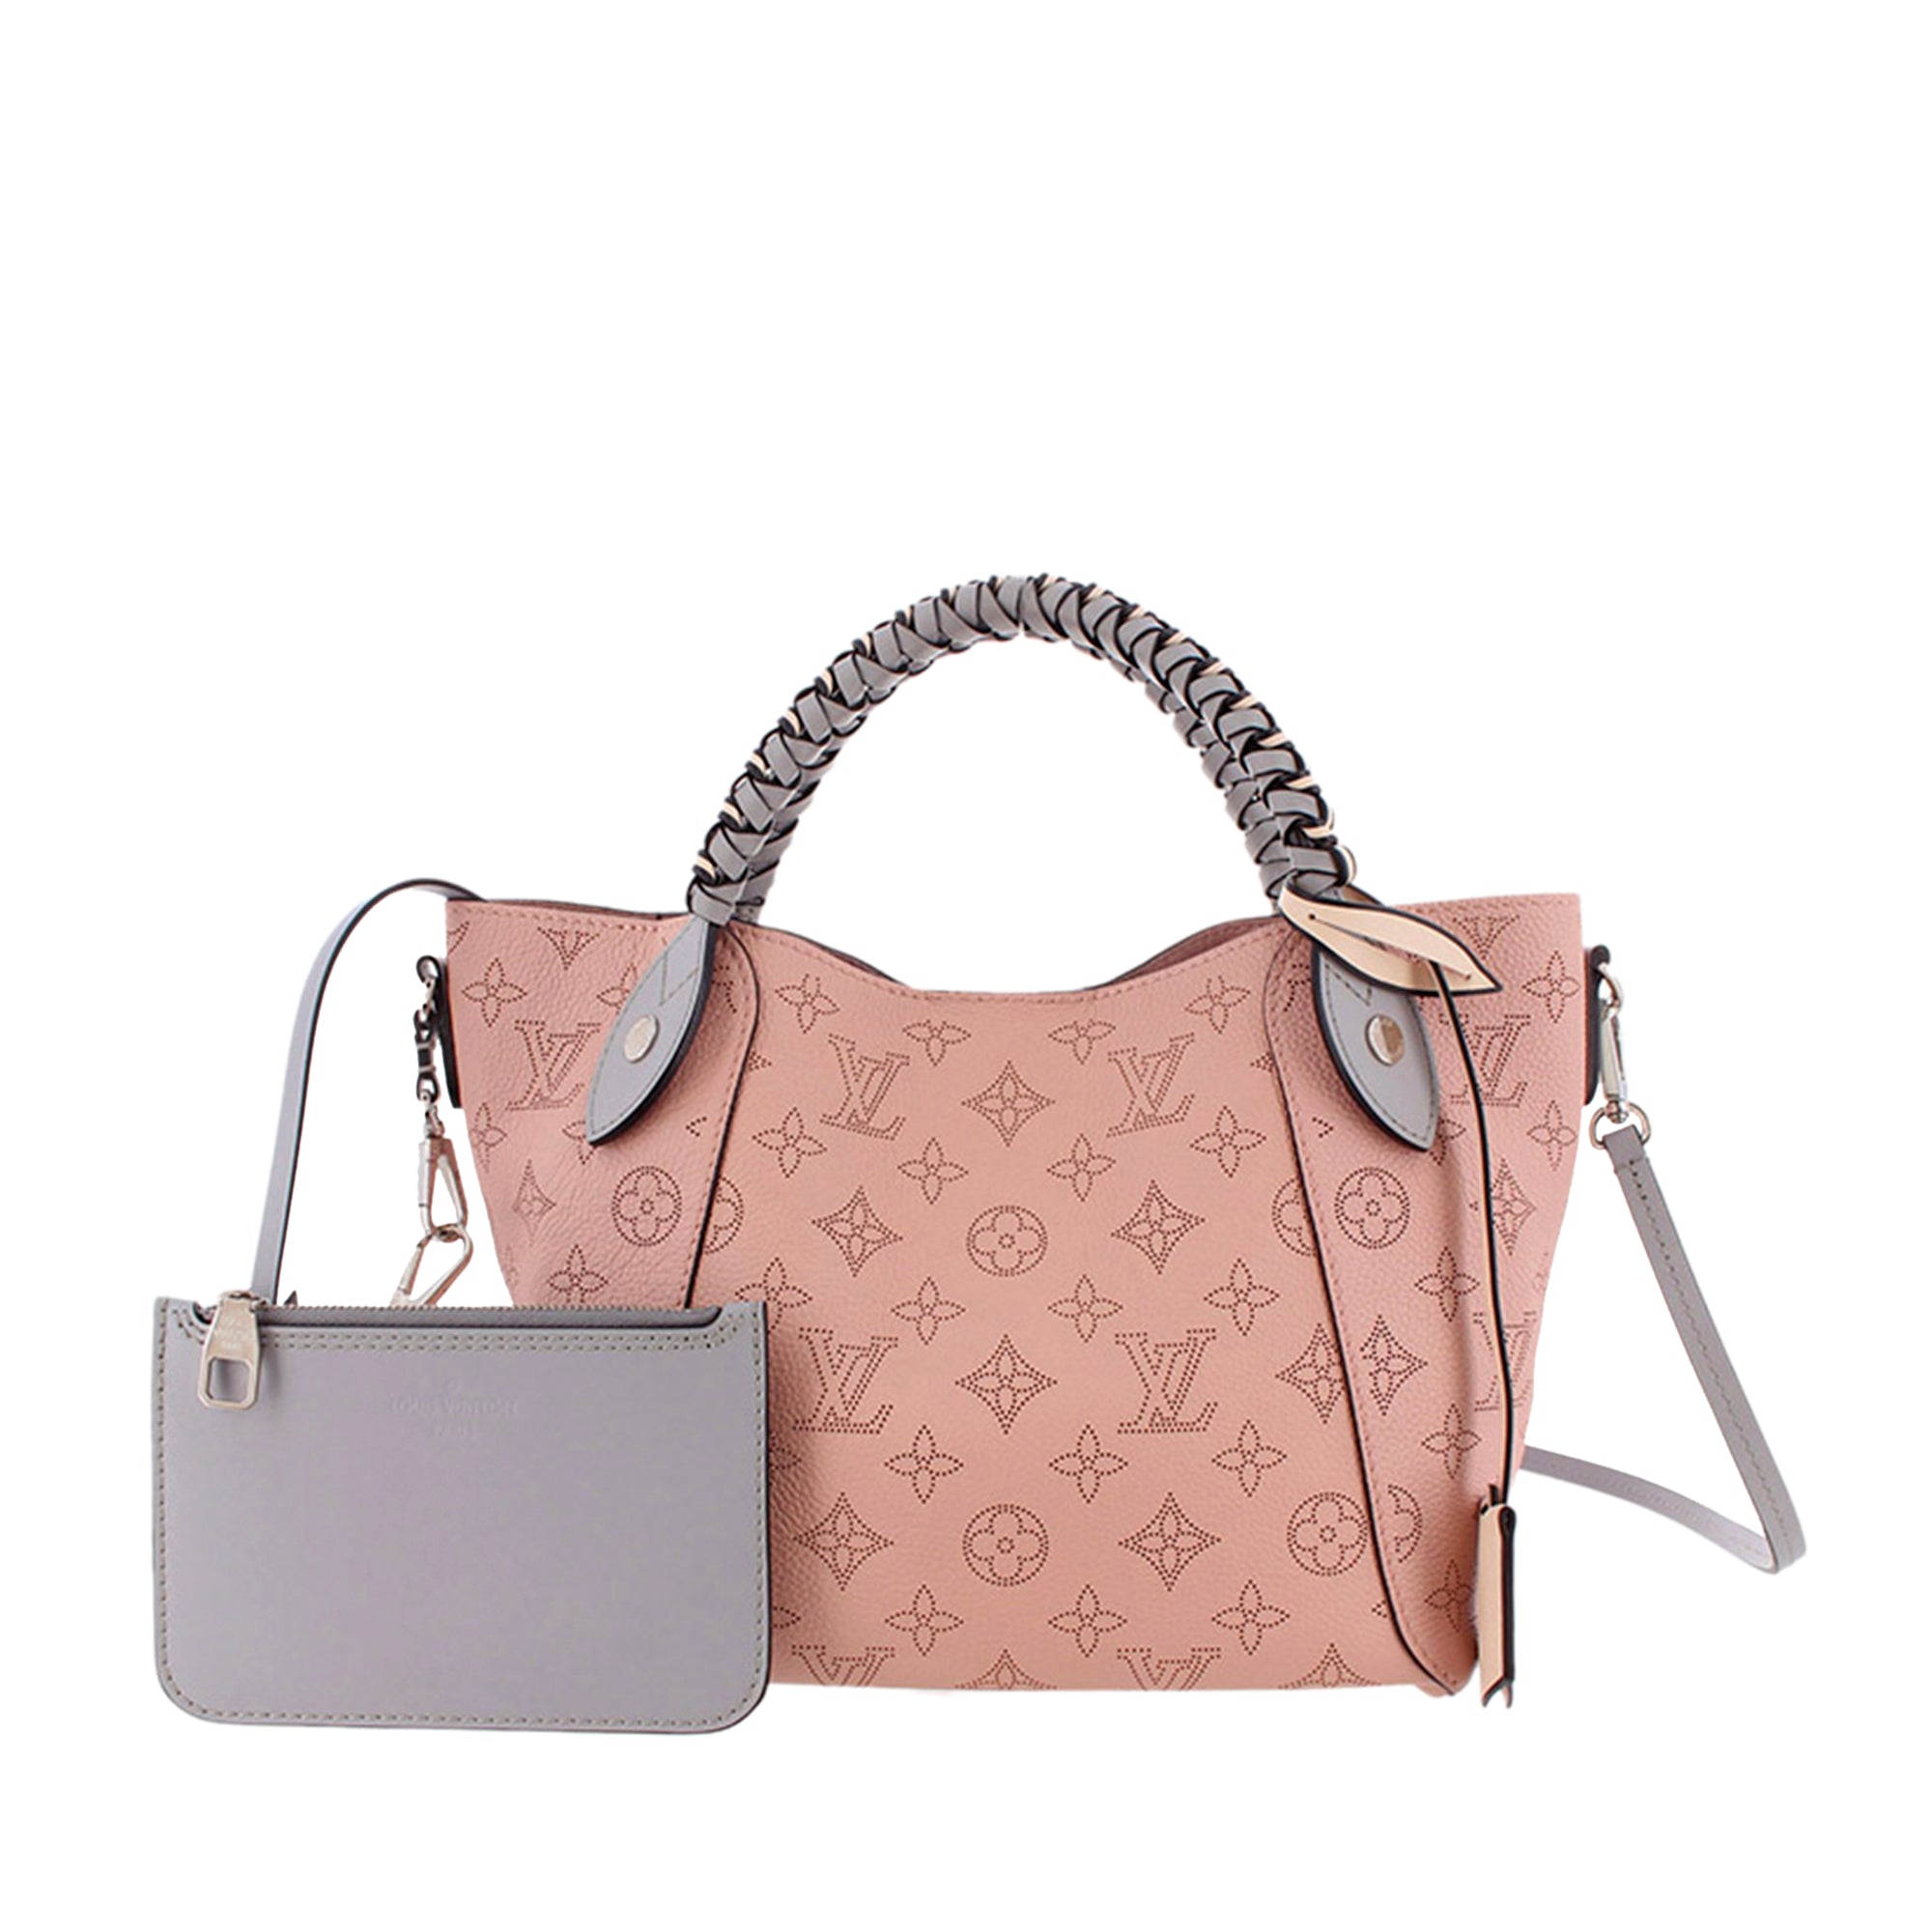 lv bag with braided handle